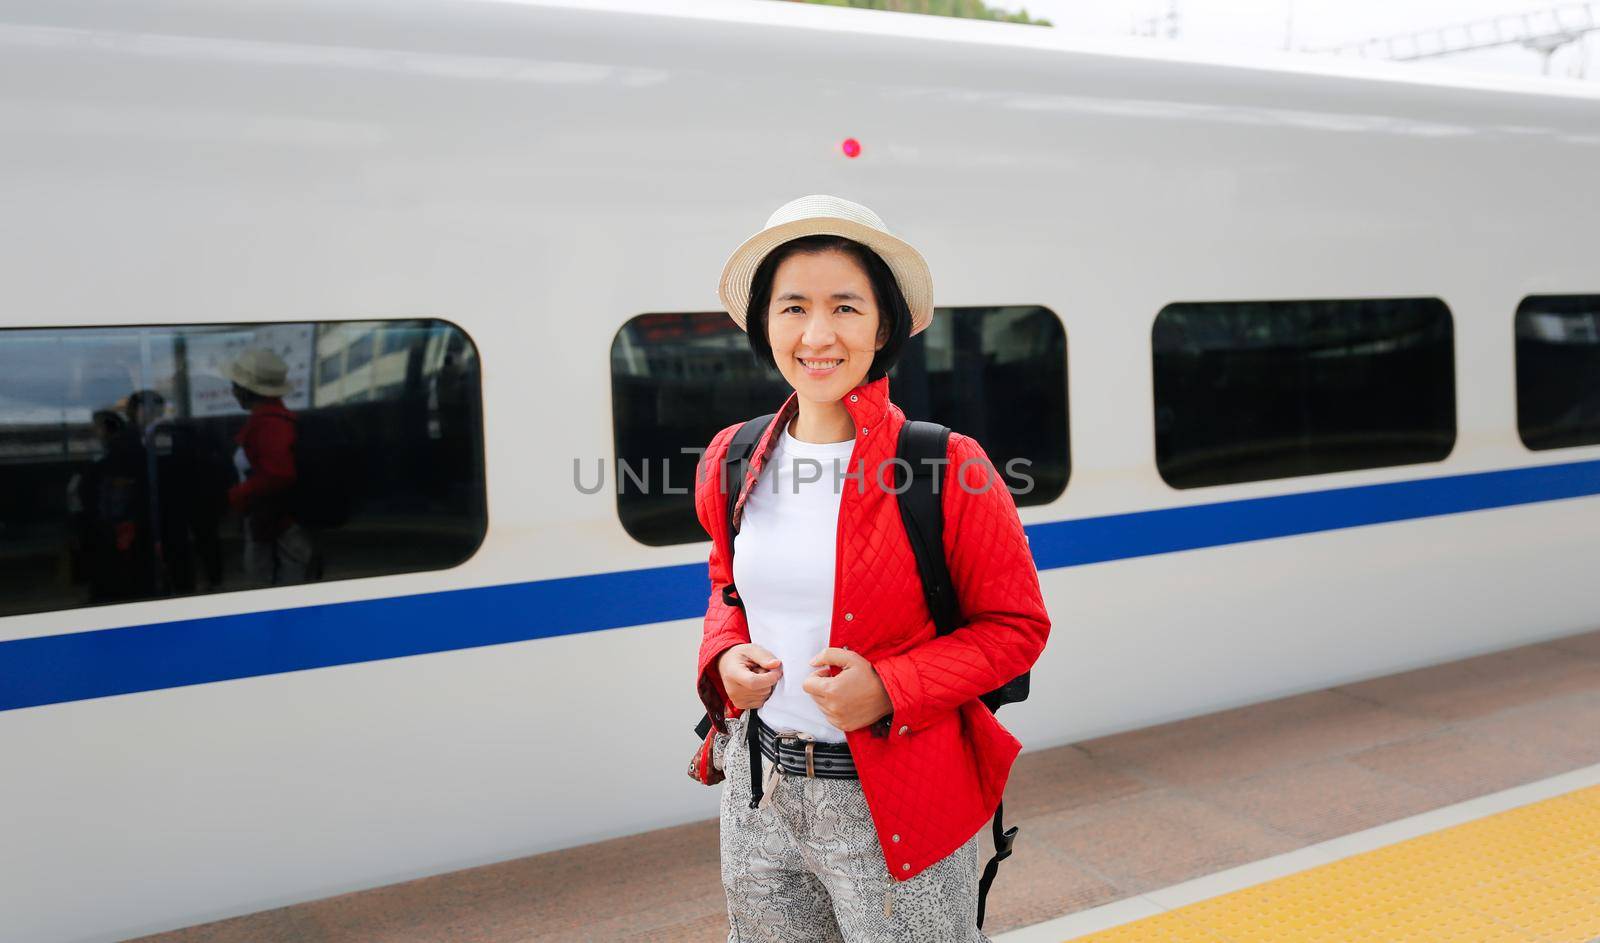 Tourist passengers traveling with China high-speed train is a quick and easy affair due to the high speed rail.